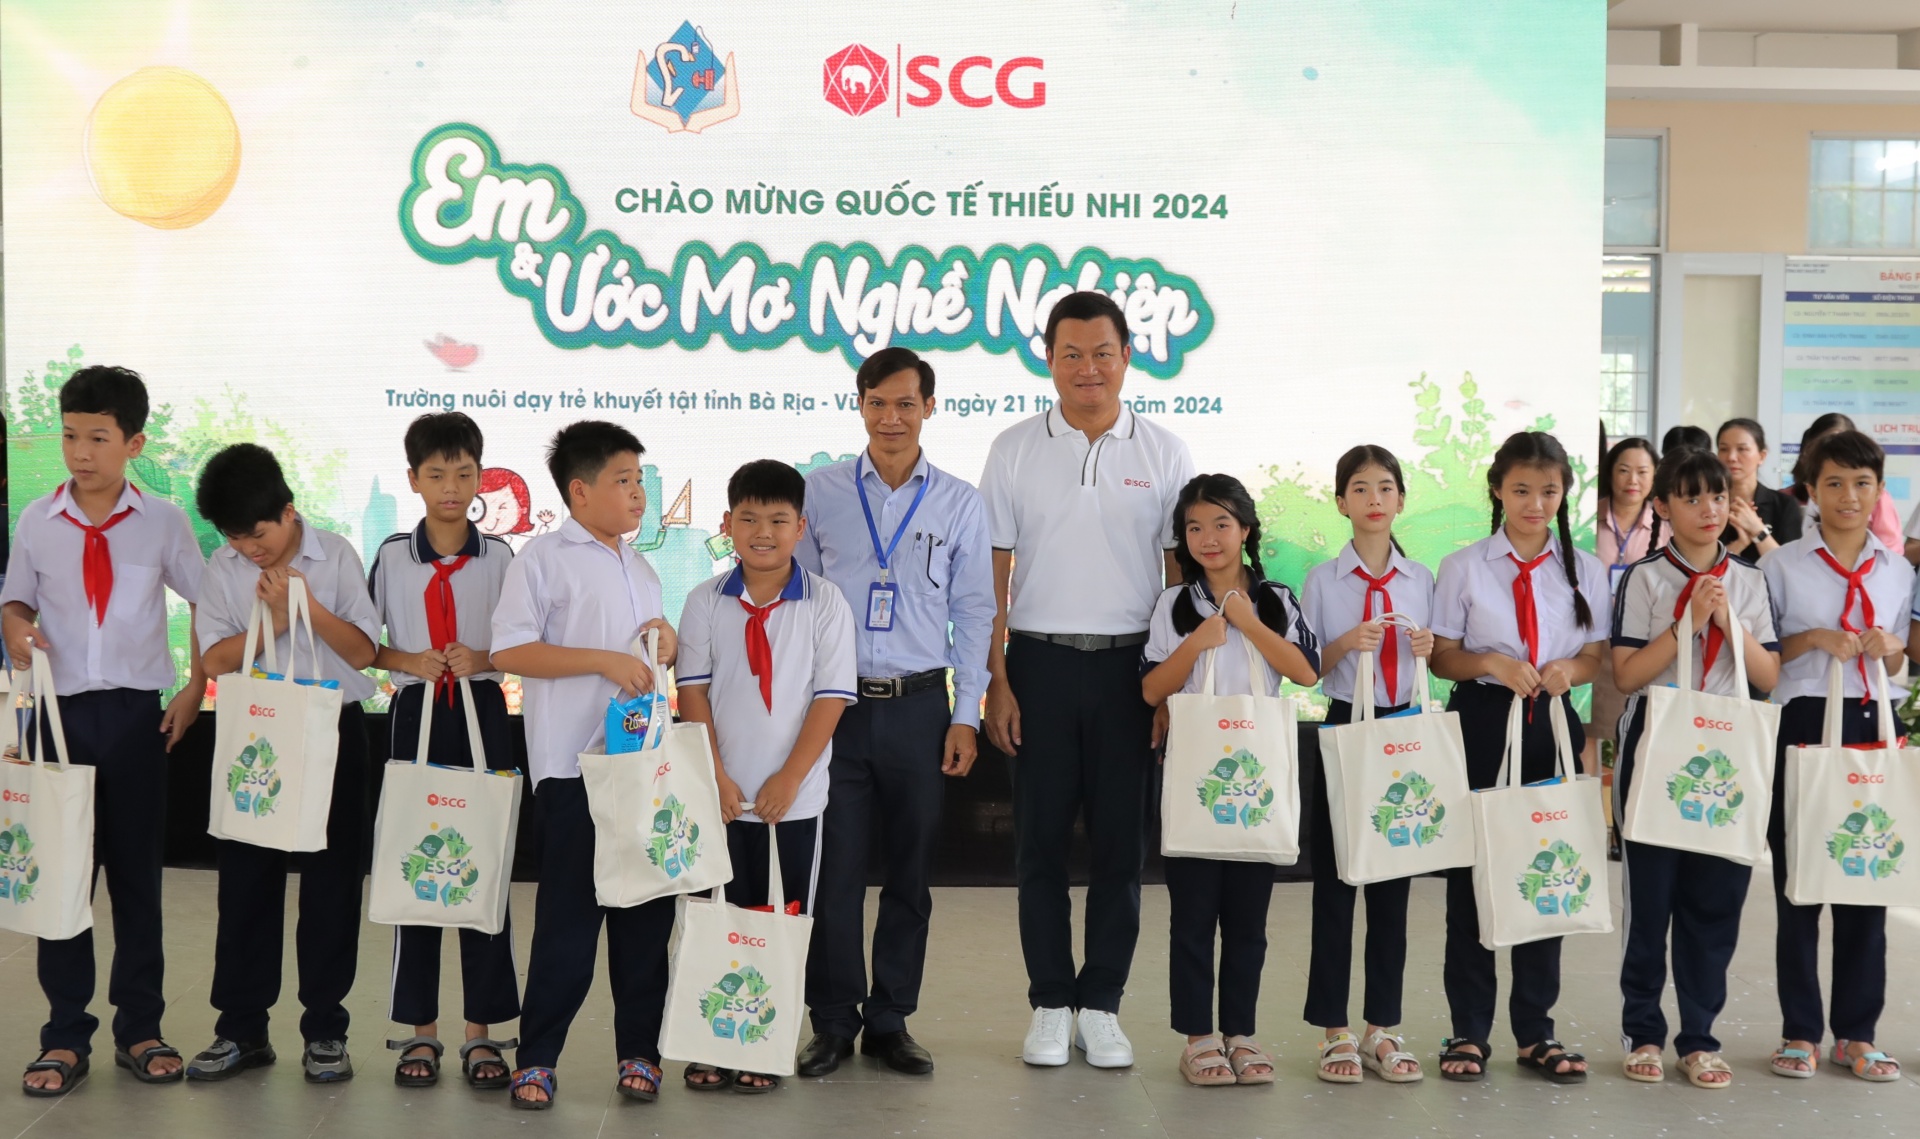 SCG provides career opportunities, creating sustainable future for children with disabilities